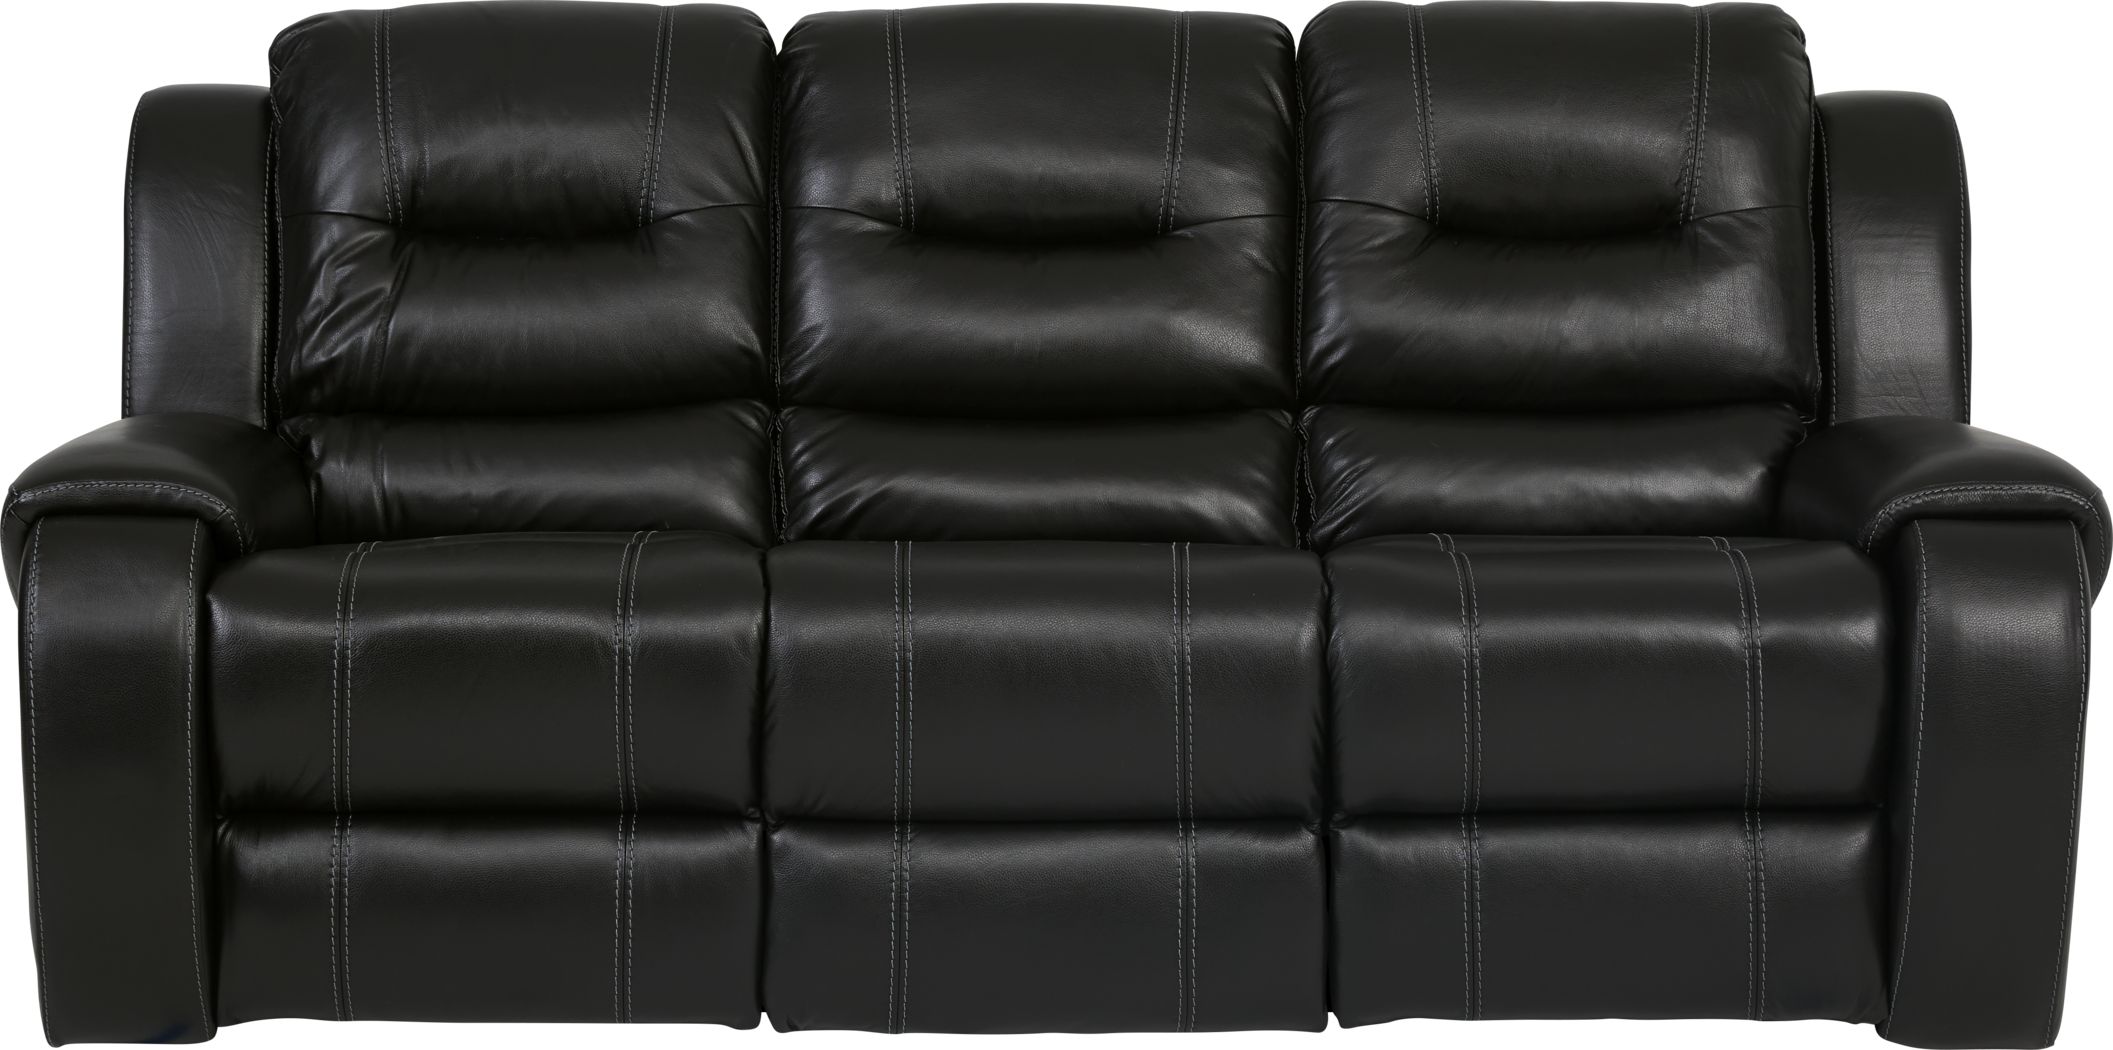 black leather power reclining sofa and loveseat